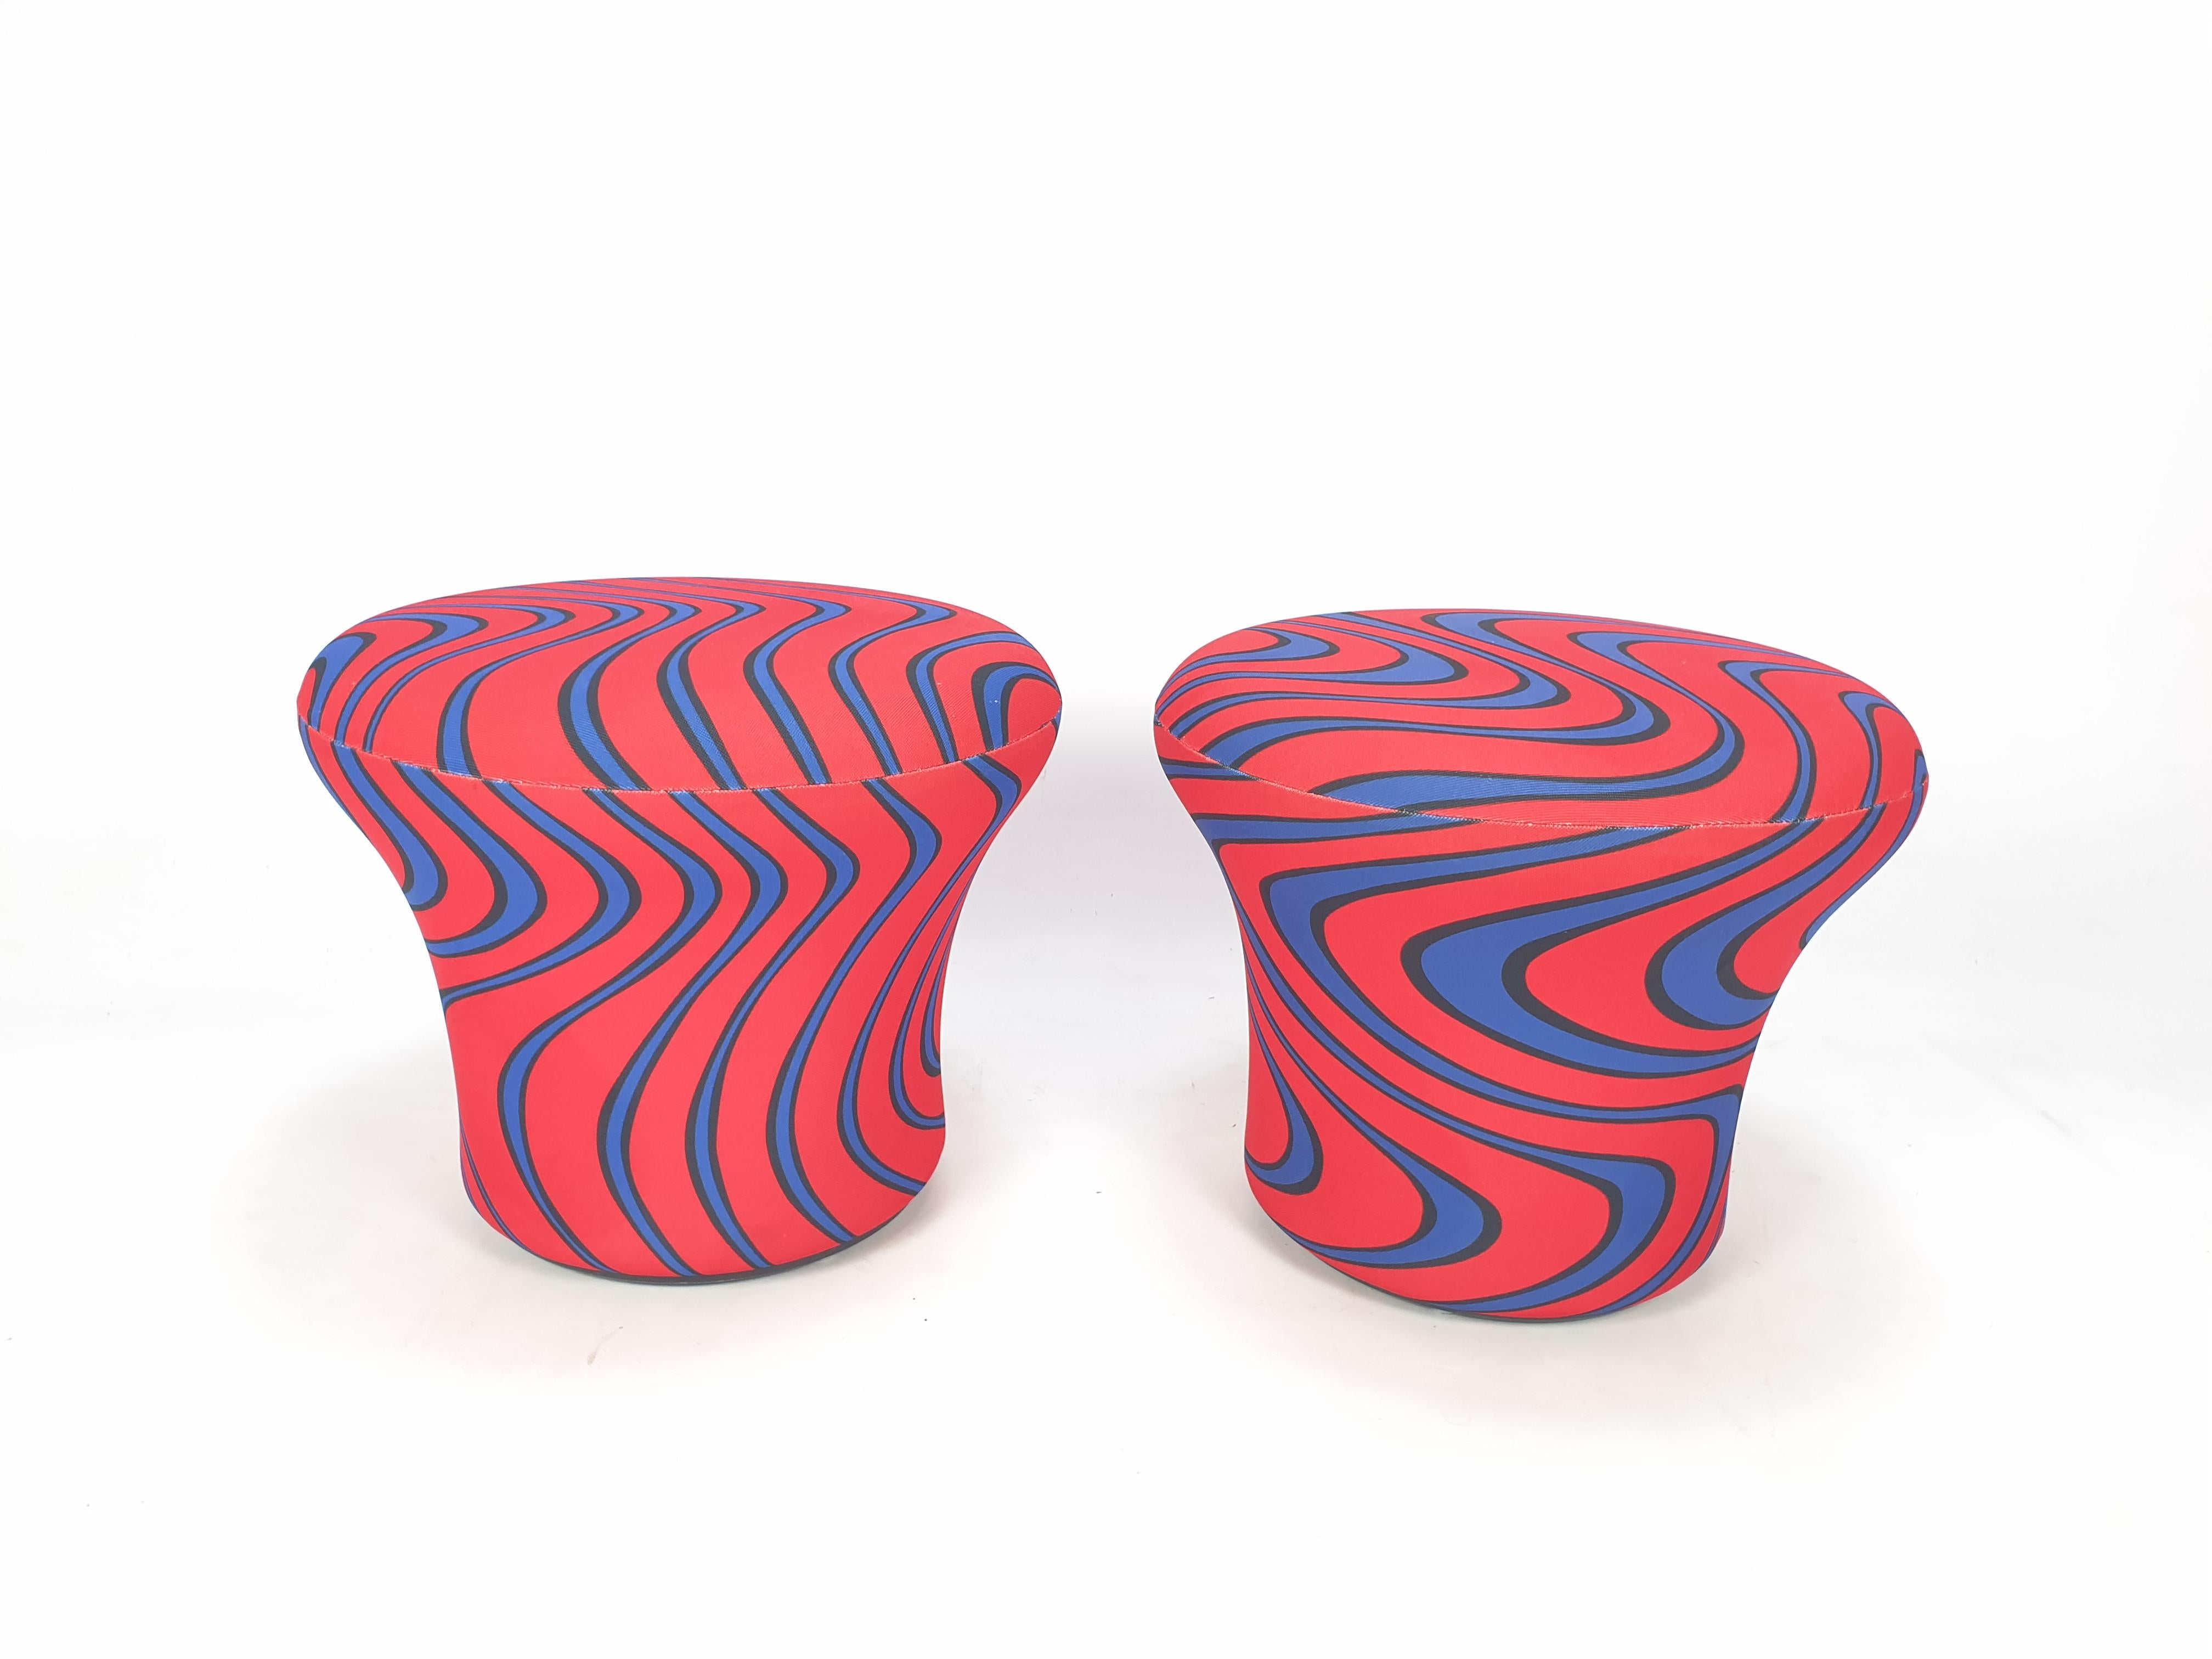 Amazing Mushroom poof, designed by Pierre Paulin for Artifort in the 60's. 

It is covered with the original and stunning Momentum fabric by Jack Lenor Larsen in the colors blue and red.
This wonderful poof is in very good, nearly new condition!